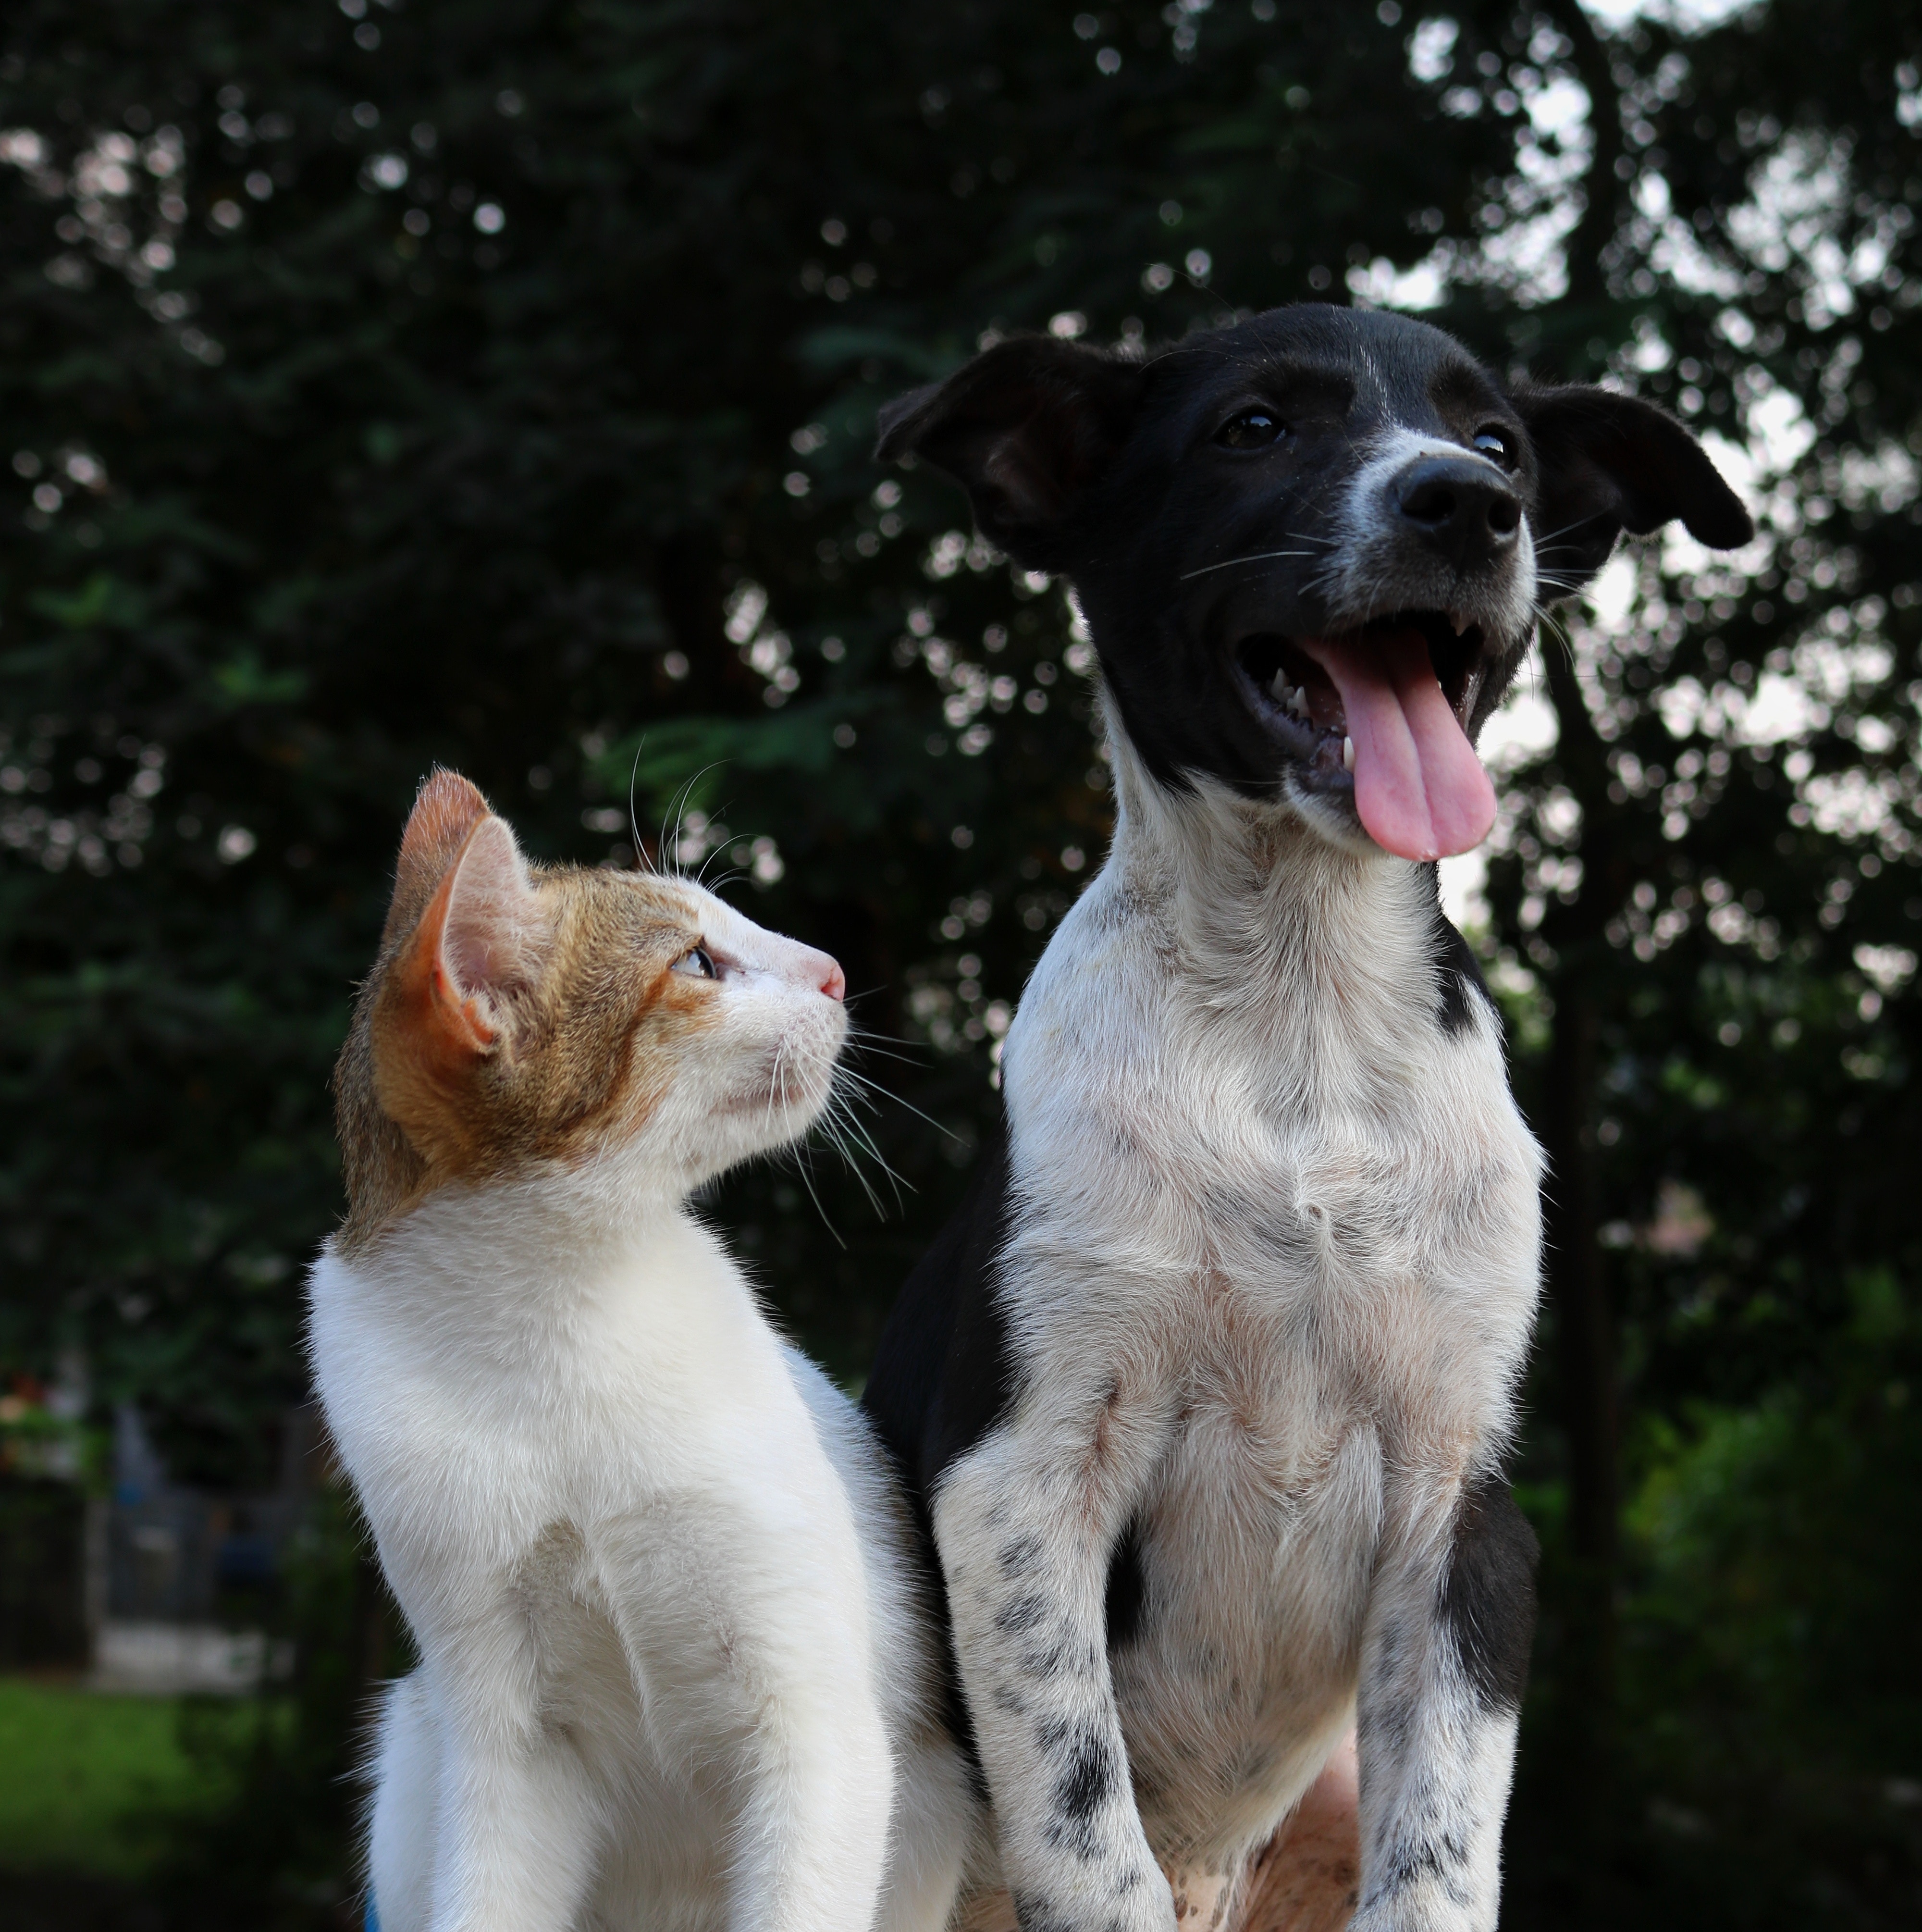 The Cancer Voice Asia | For dogs, and cats, every day is a great to be happy. Photo by Anusha Barwa on Unsplash.